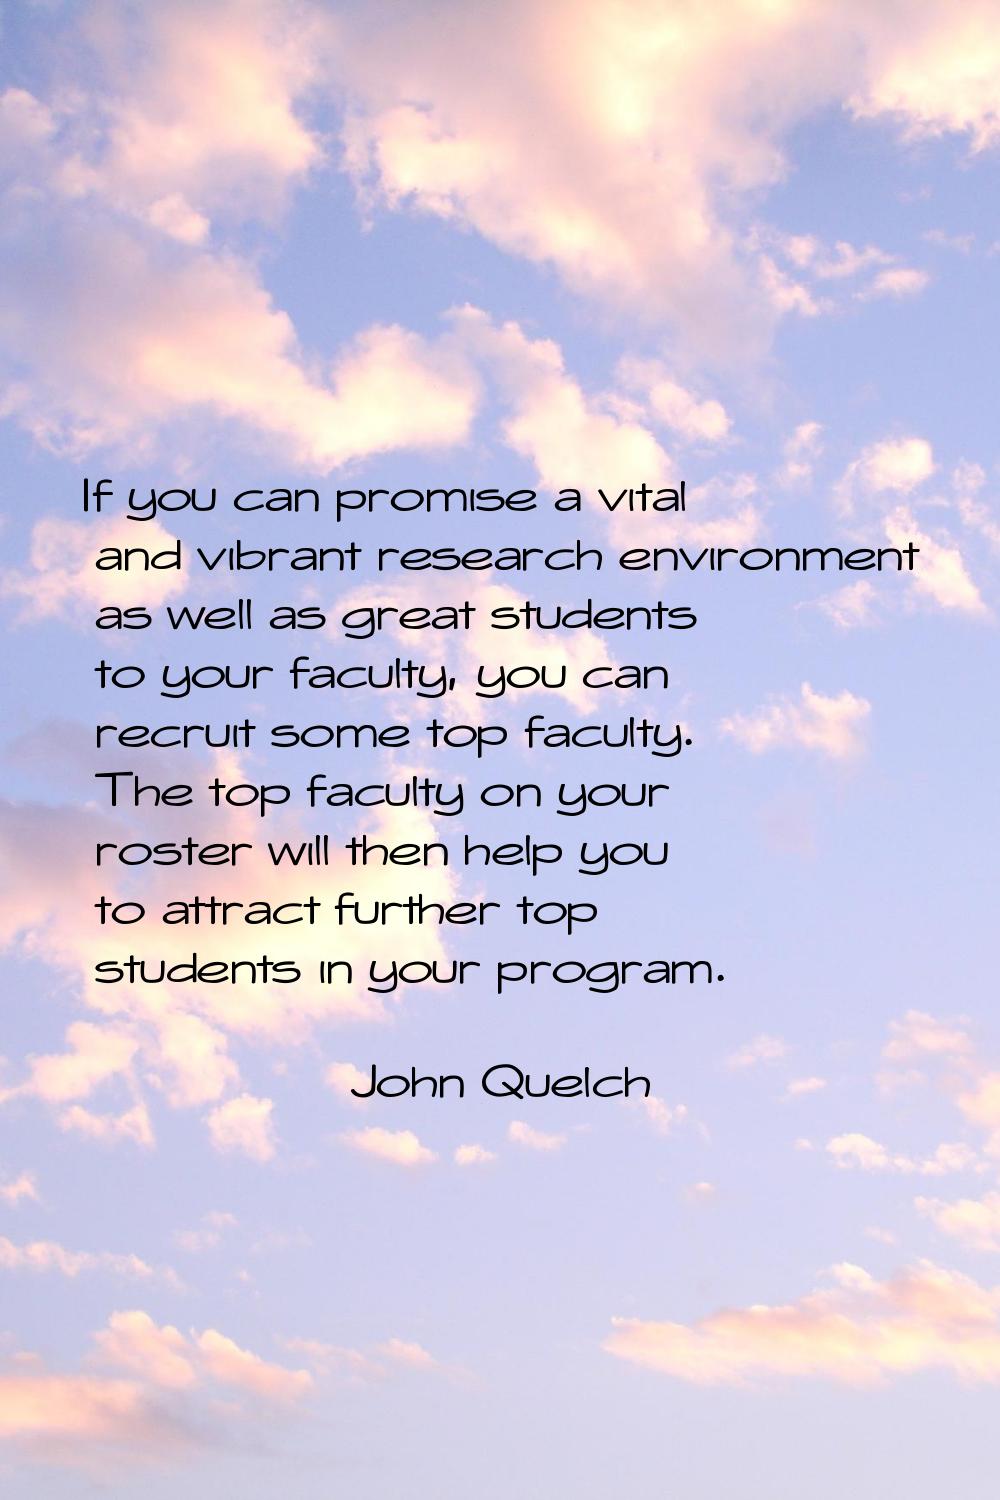 If you can promise a vital and vibrant research environment as well as great students to your facul